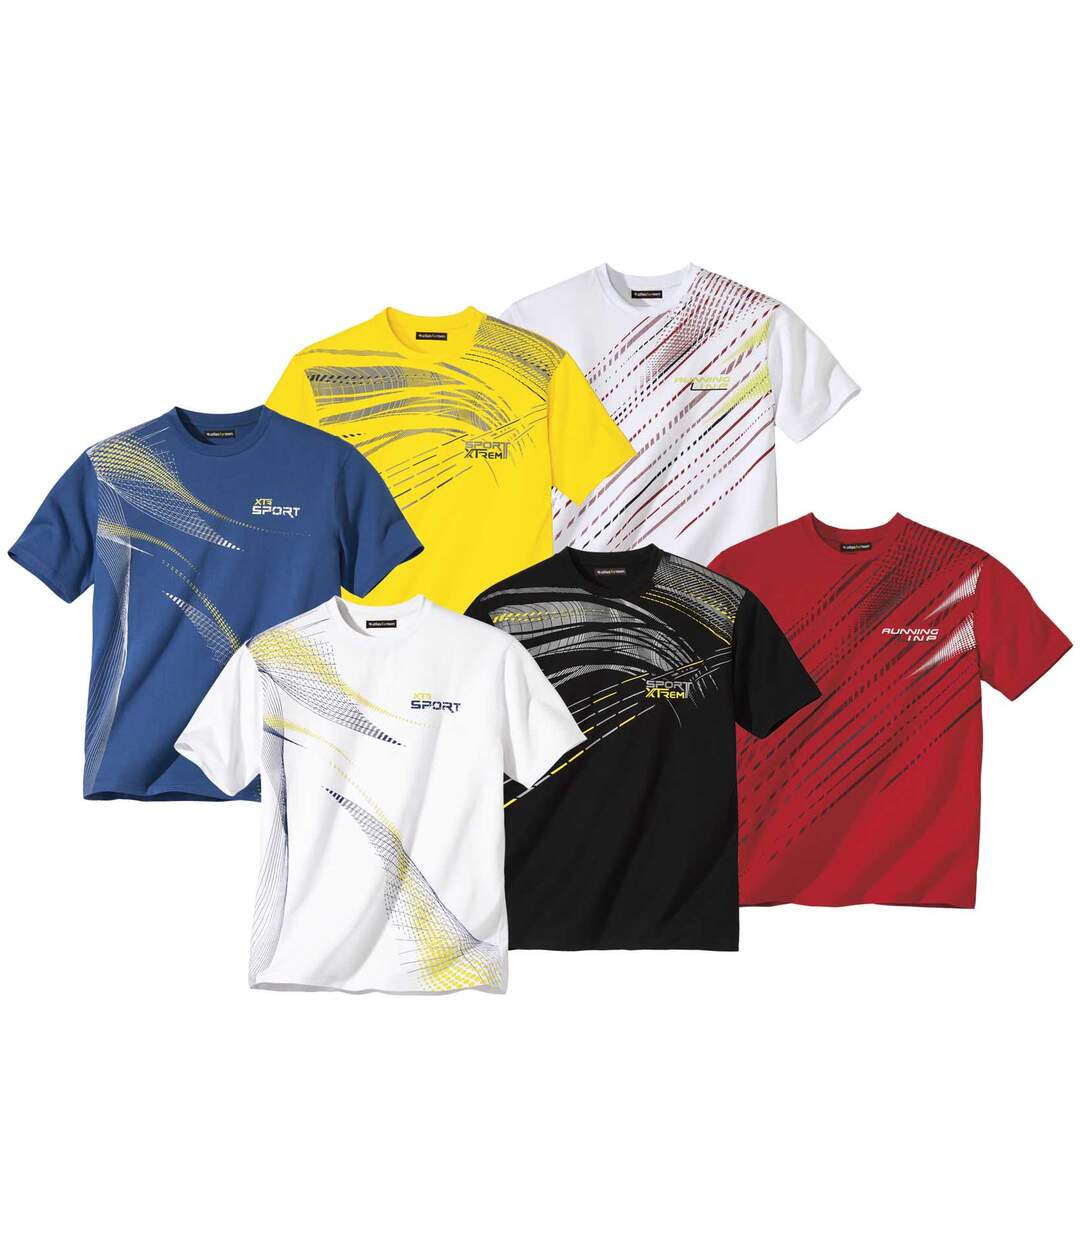 Pack of 6 Men's Graphic Sports T-Shirts Atlas For Men